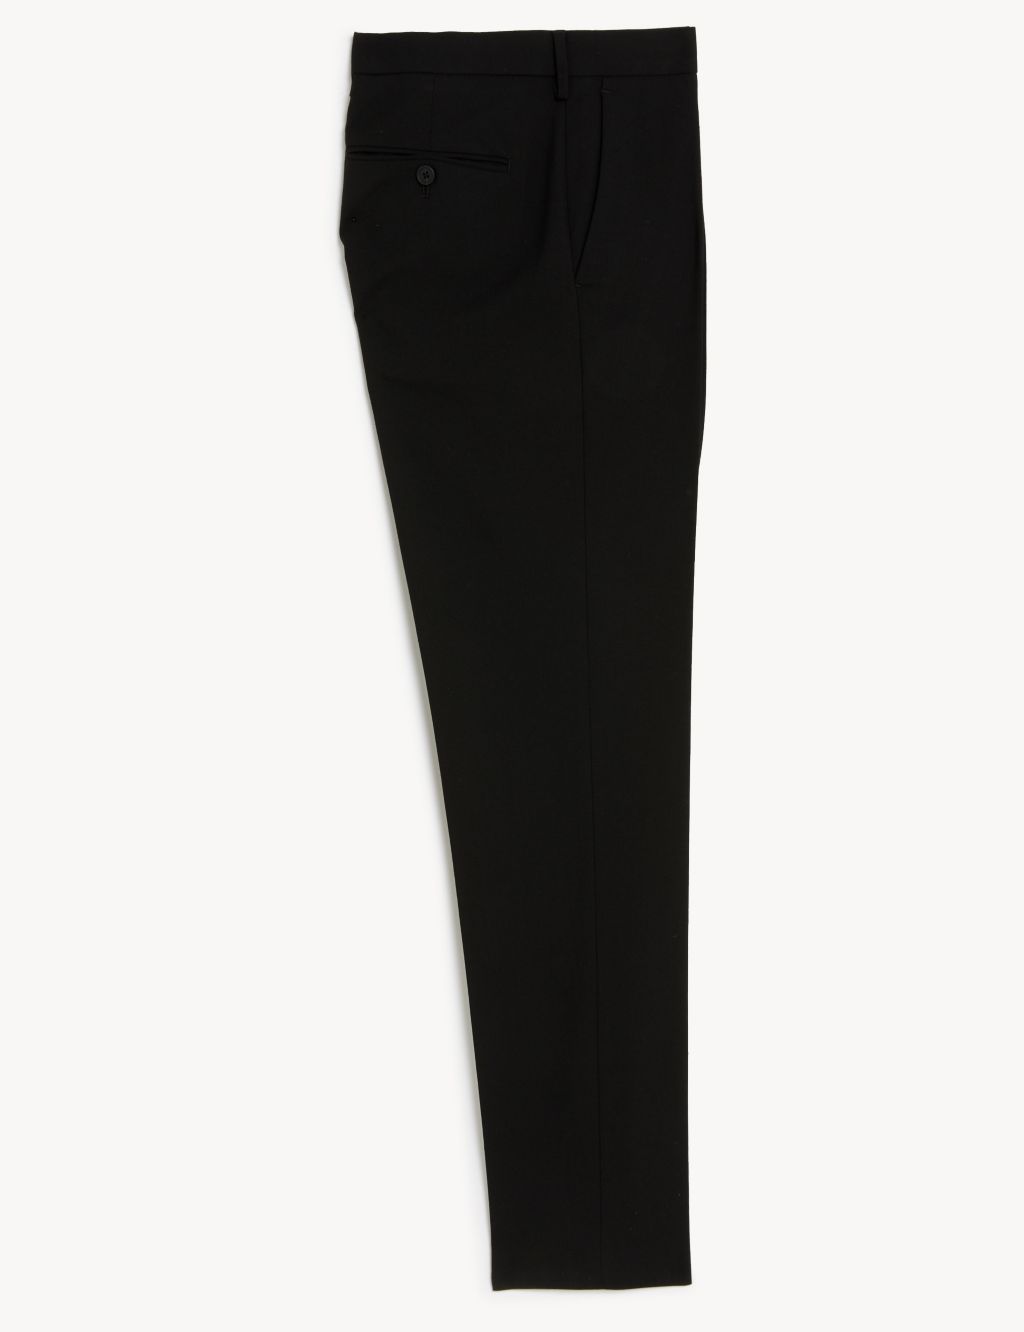 Tailored Fit Flat Front Stretch Trousers image 2